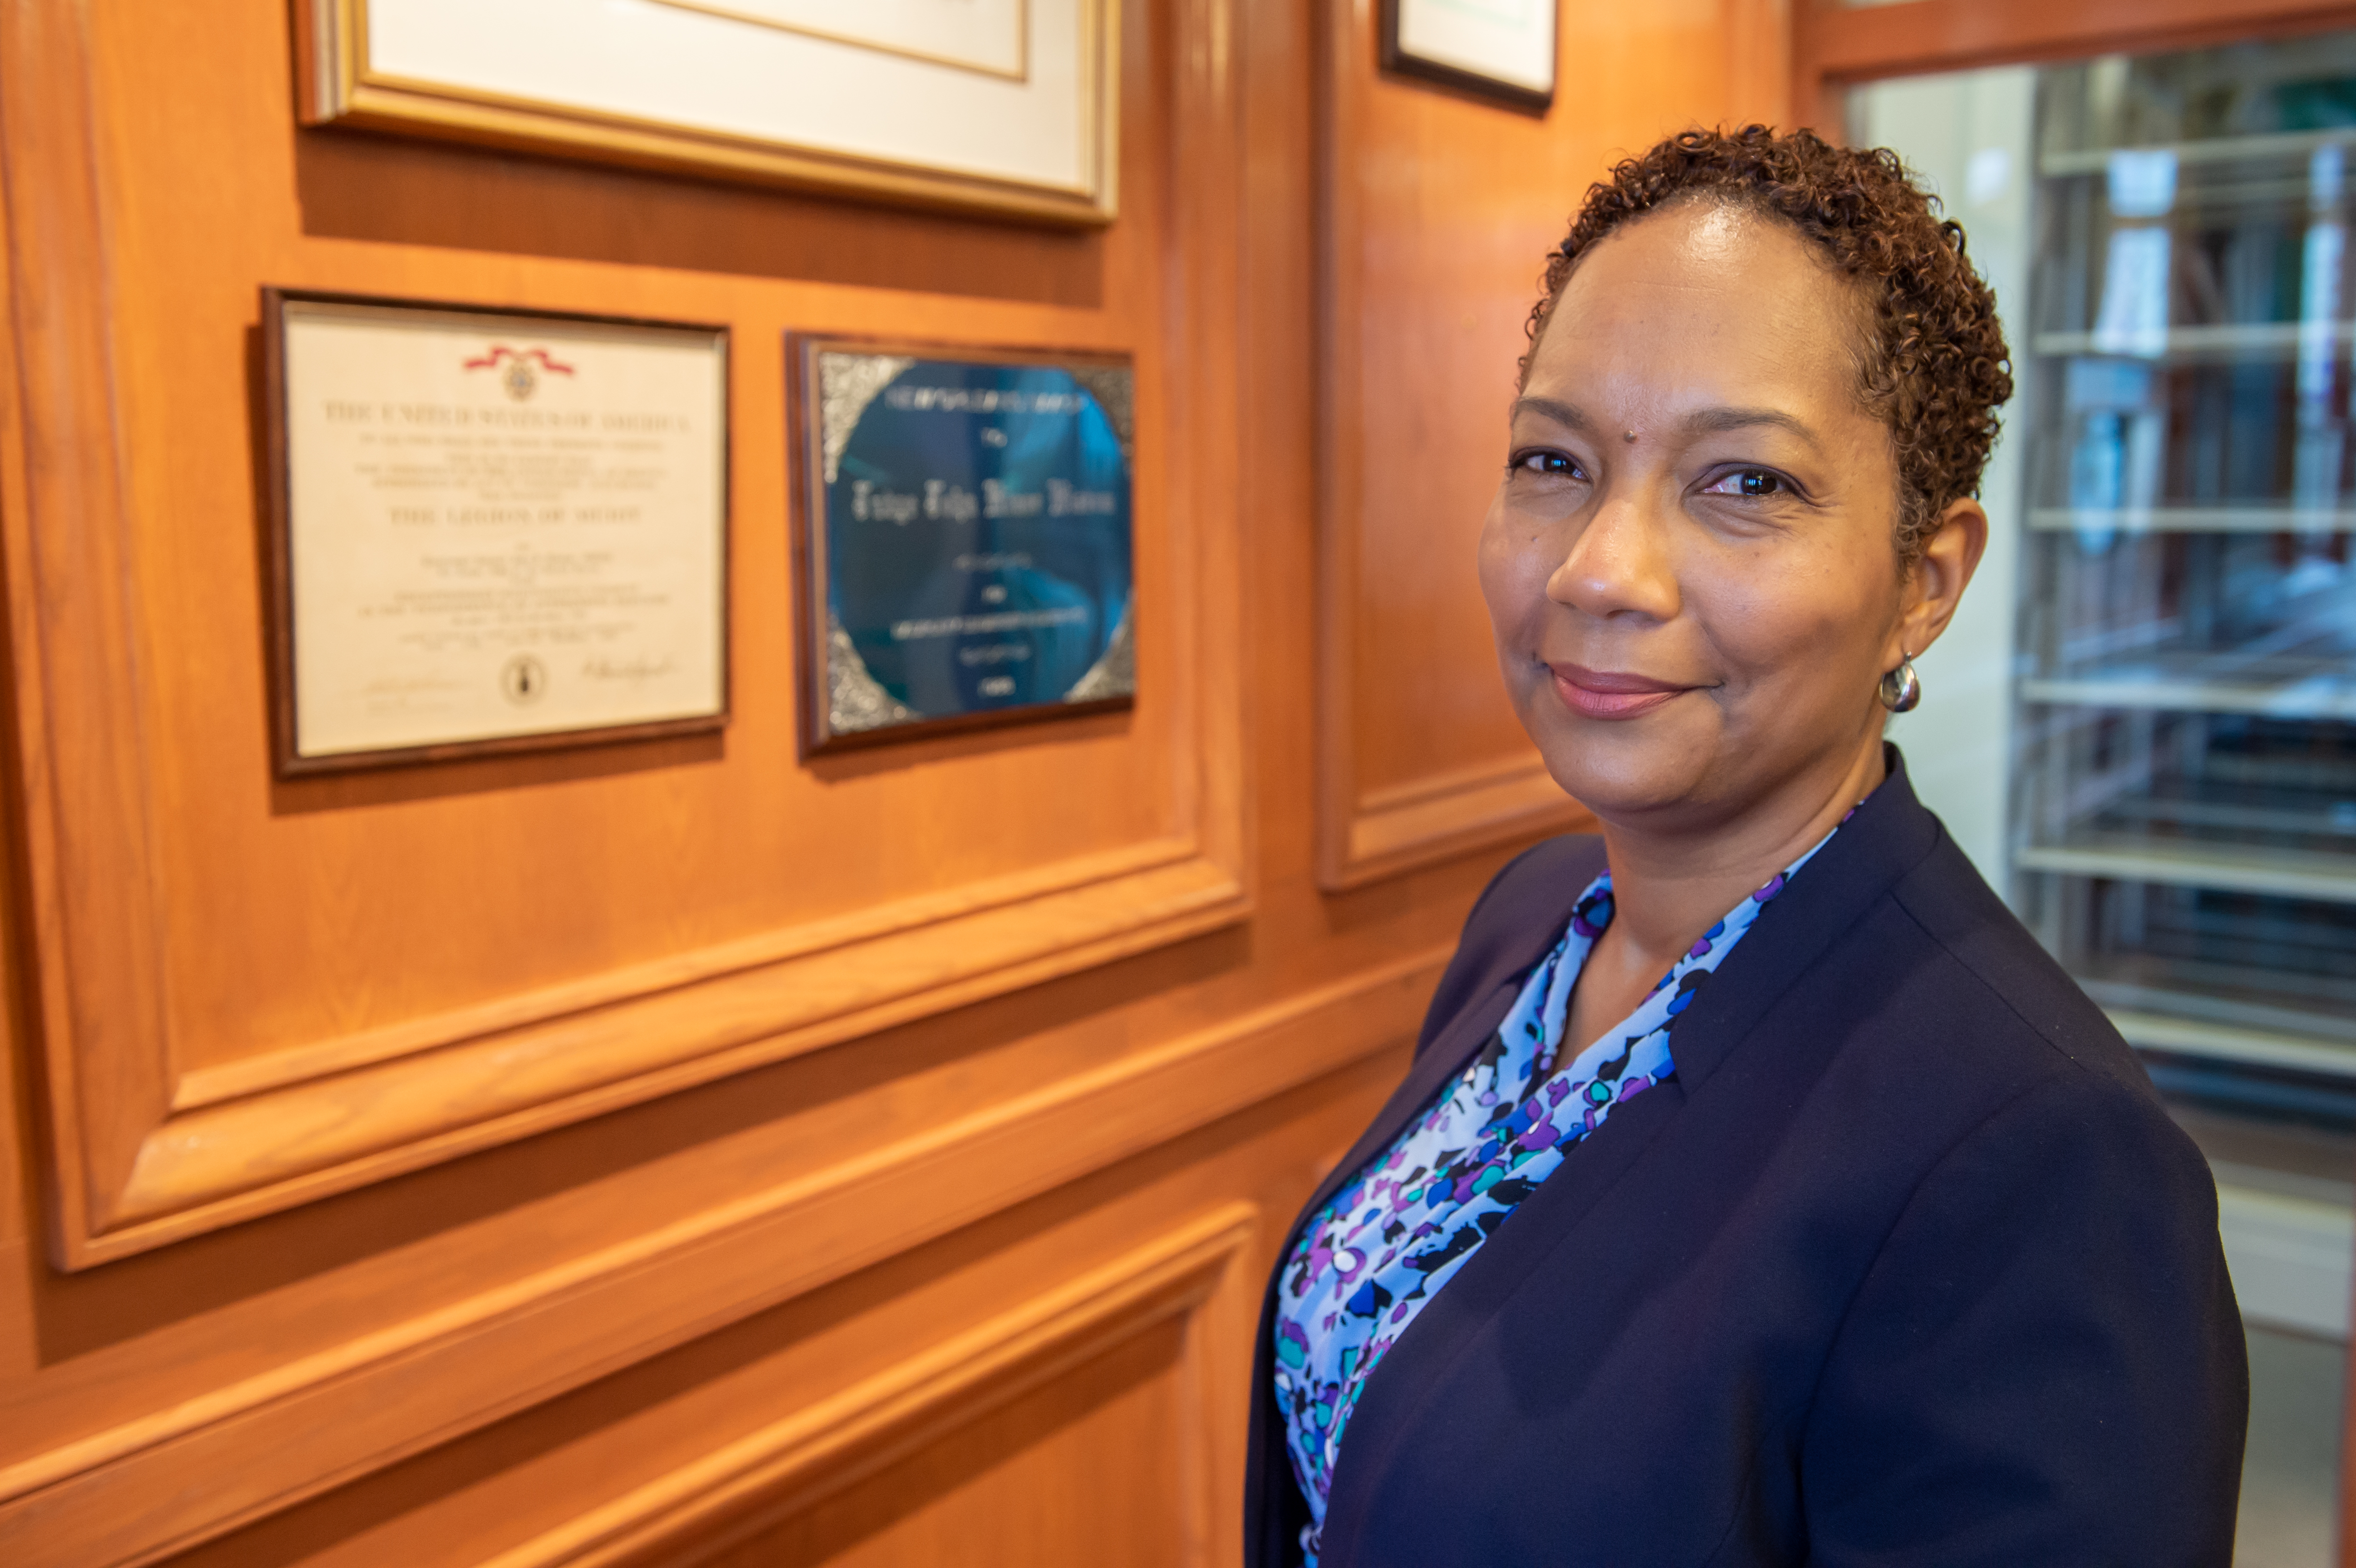 Tonya’s appointment to Associate Dean